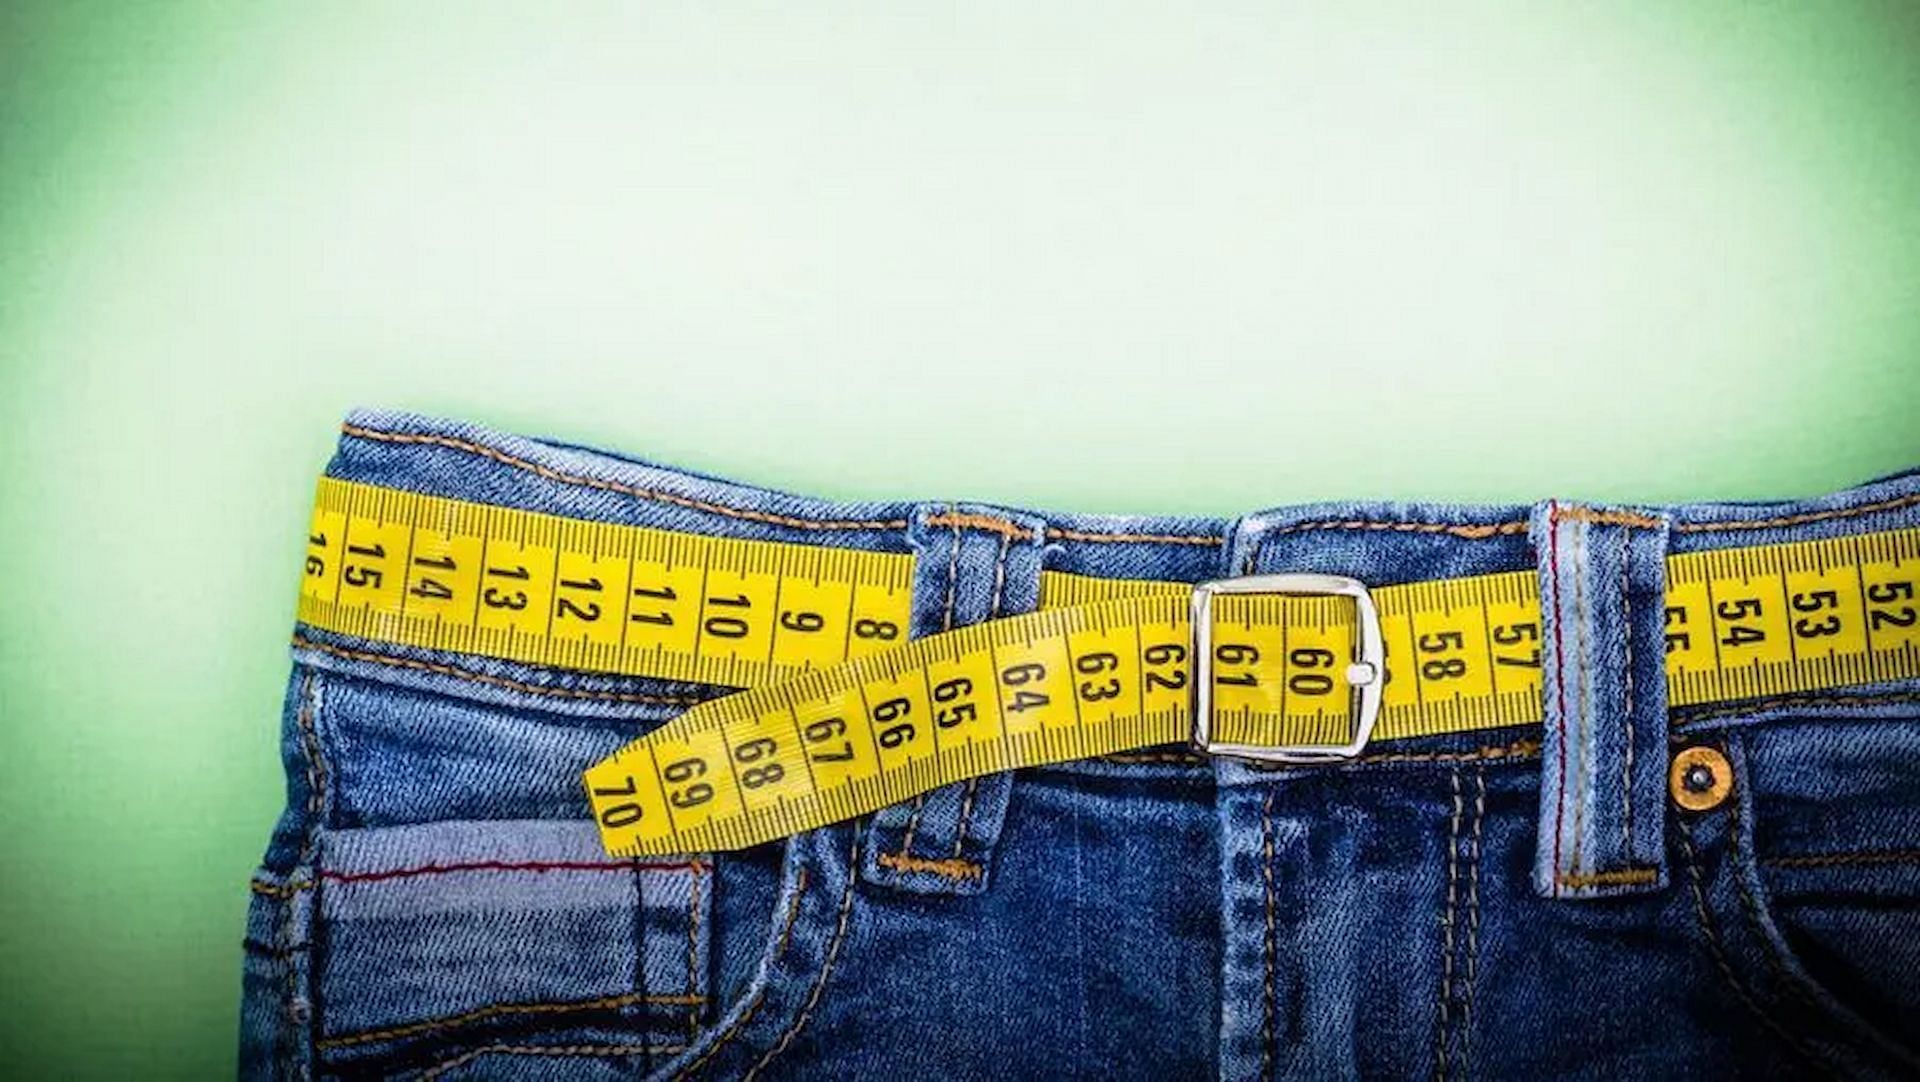 Based on studies between 2017 and 2020, 41.9% of adults in America are obese (Image via Getty)